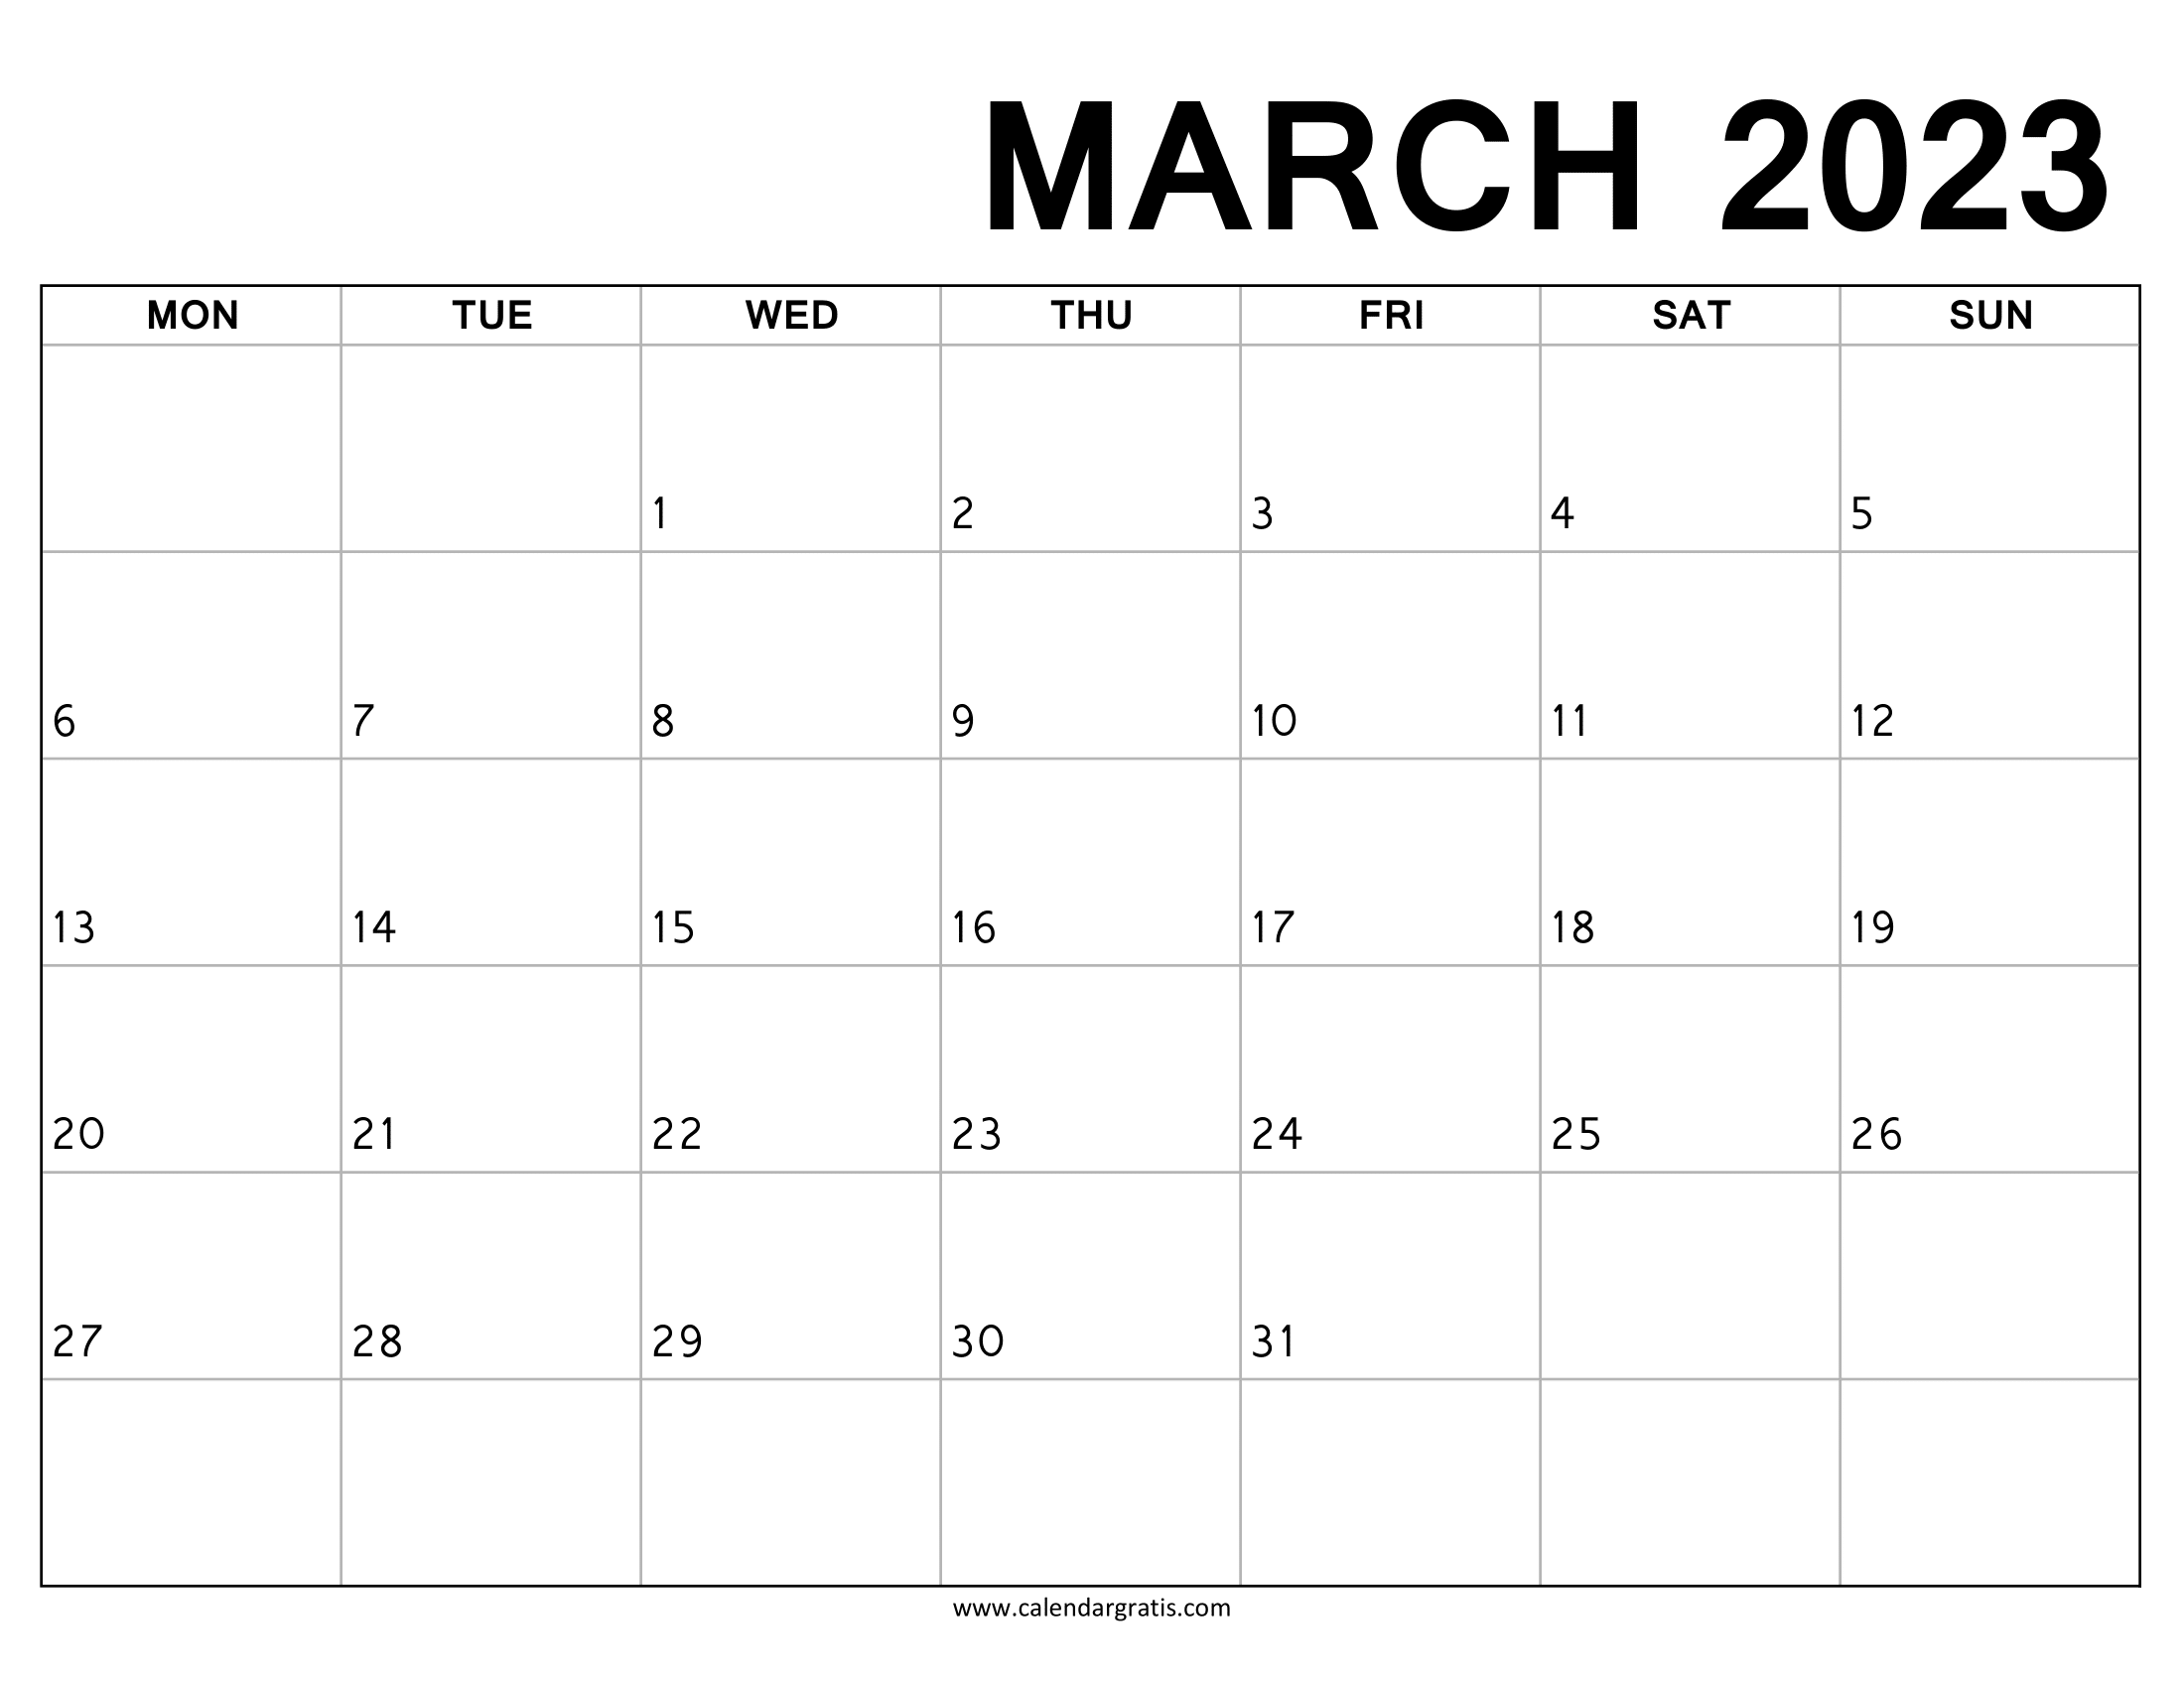 Download March 2023 Calendar Printable Monday Start, Monday to Sunday, Black and White Monthly Calendar Template.